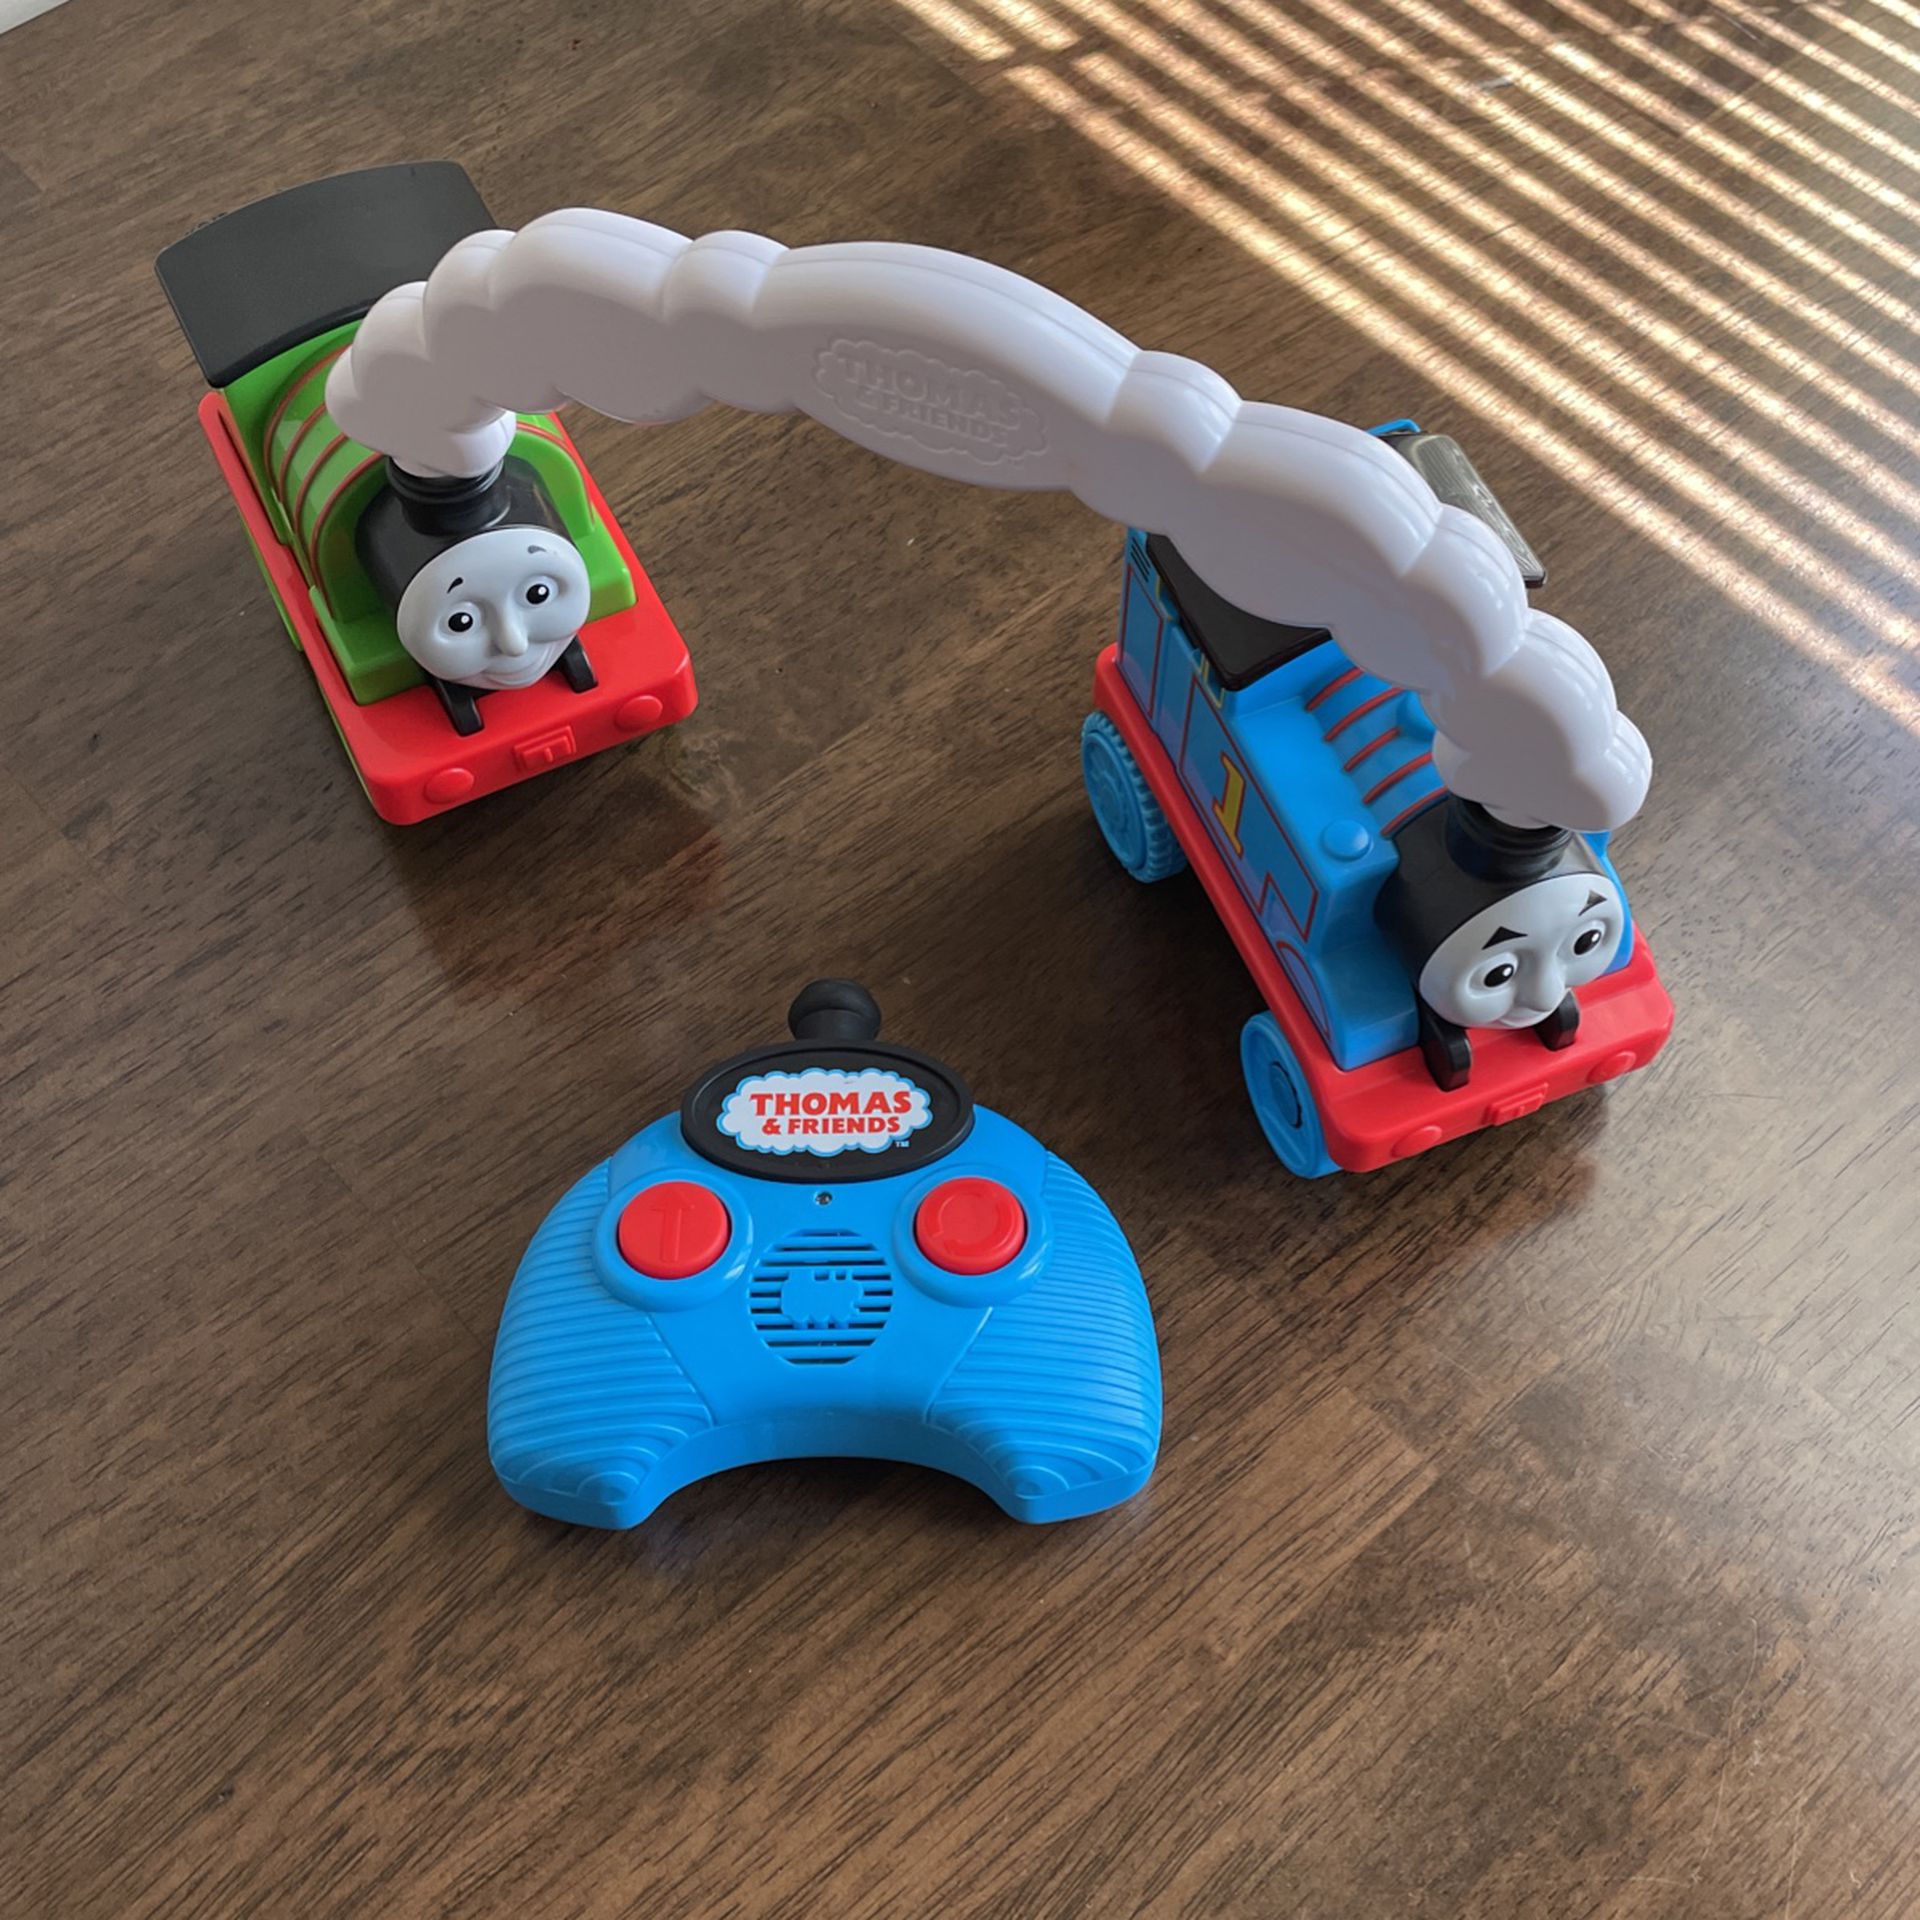 Thomas & Friends Race & Chase R/C, Remote Controlled Toy 